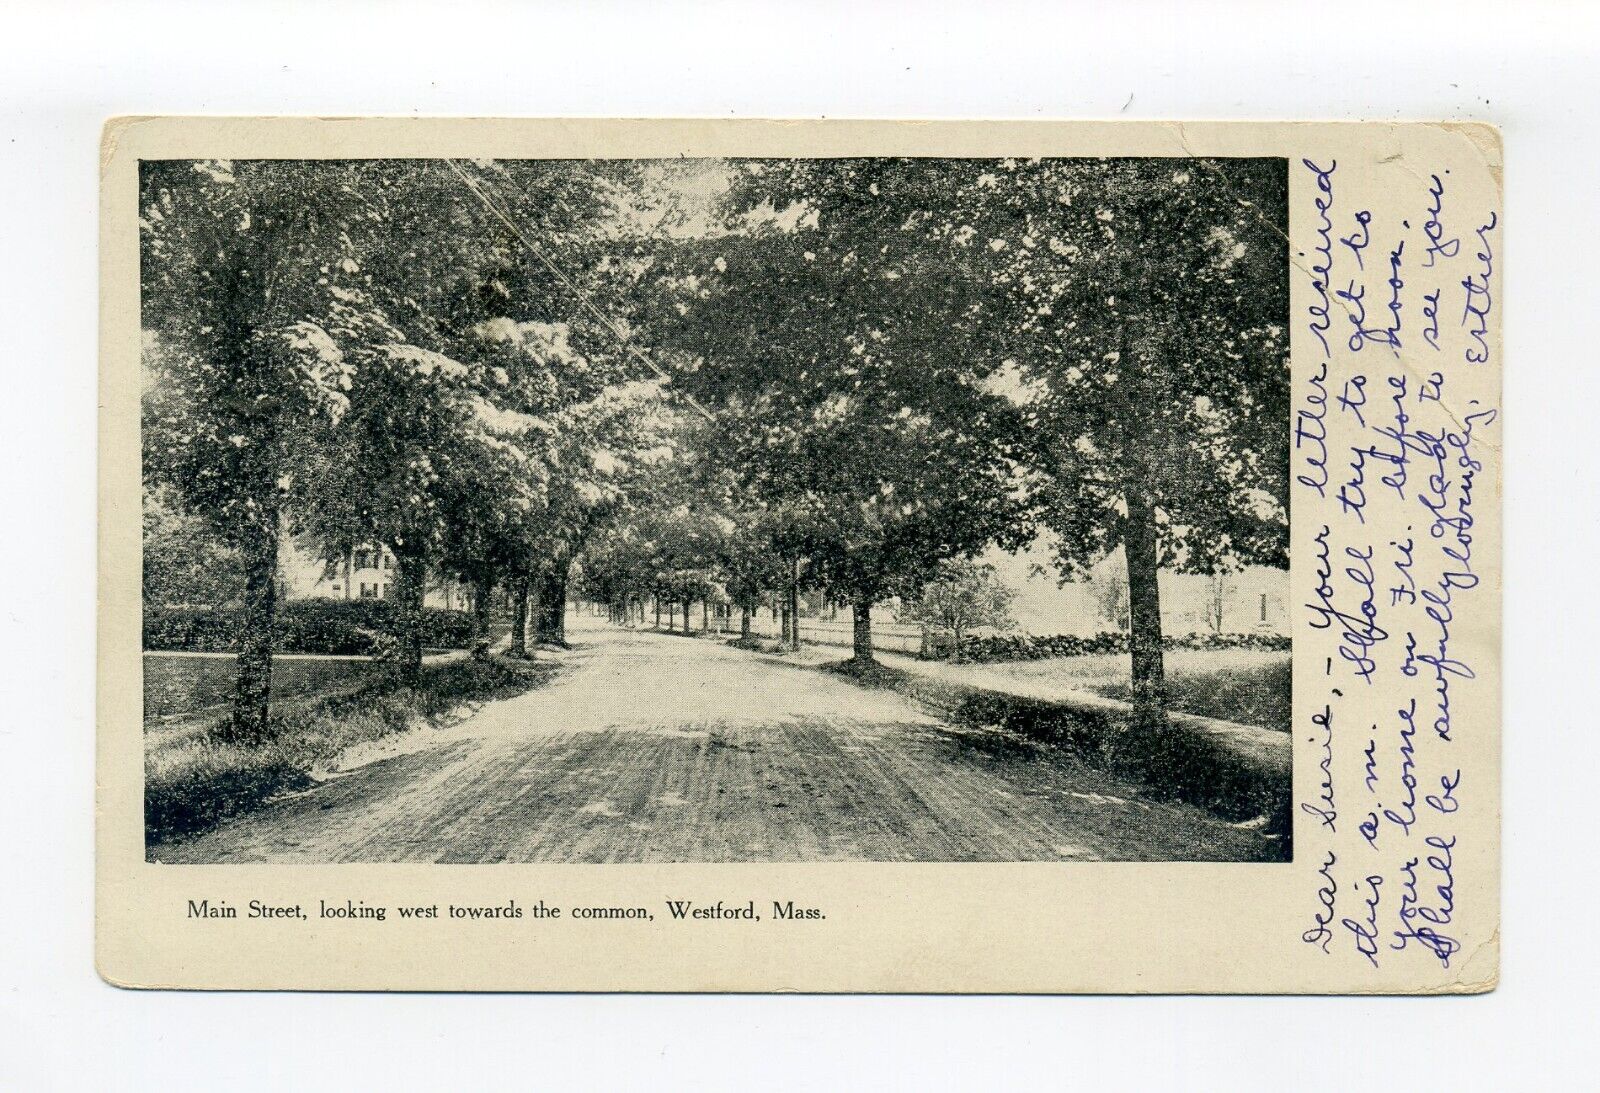 Westford MA 1909 postcard, Main Street looking west, dirt road and common